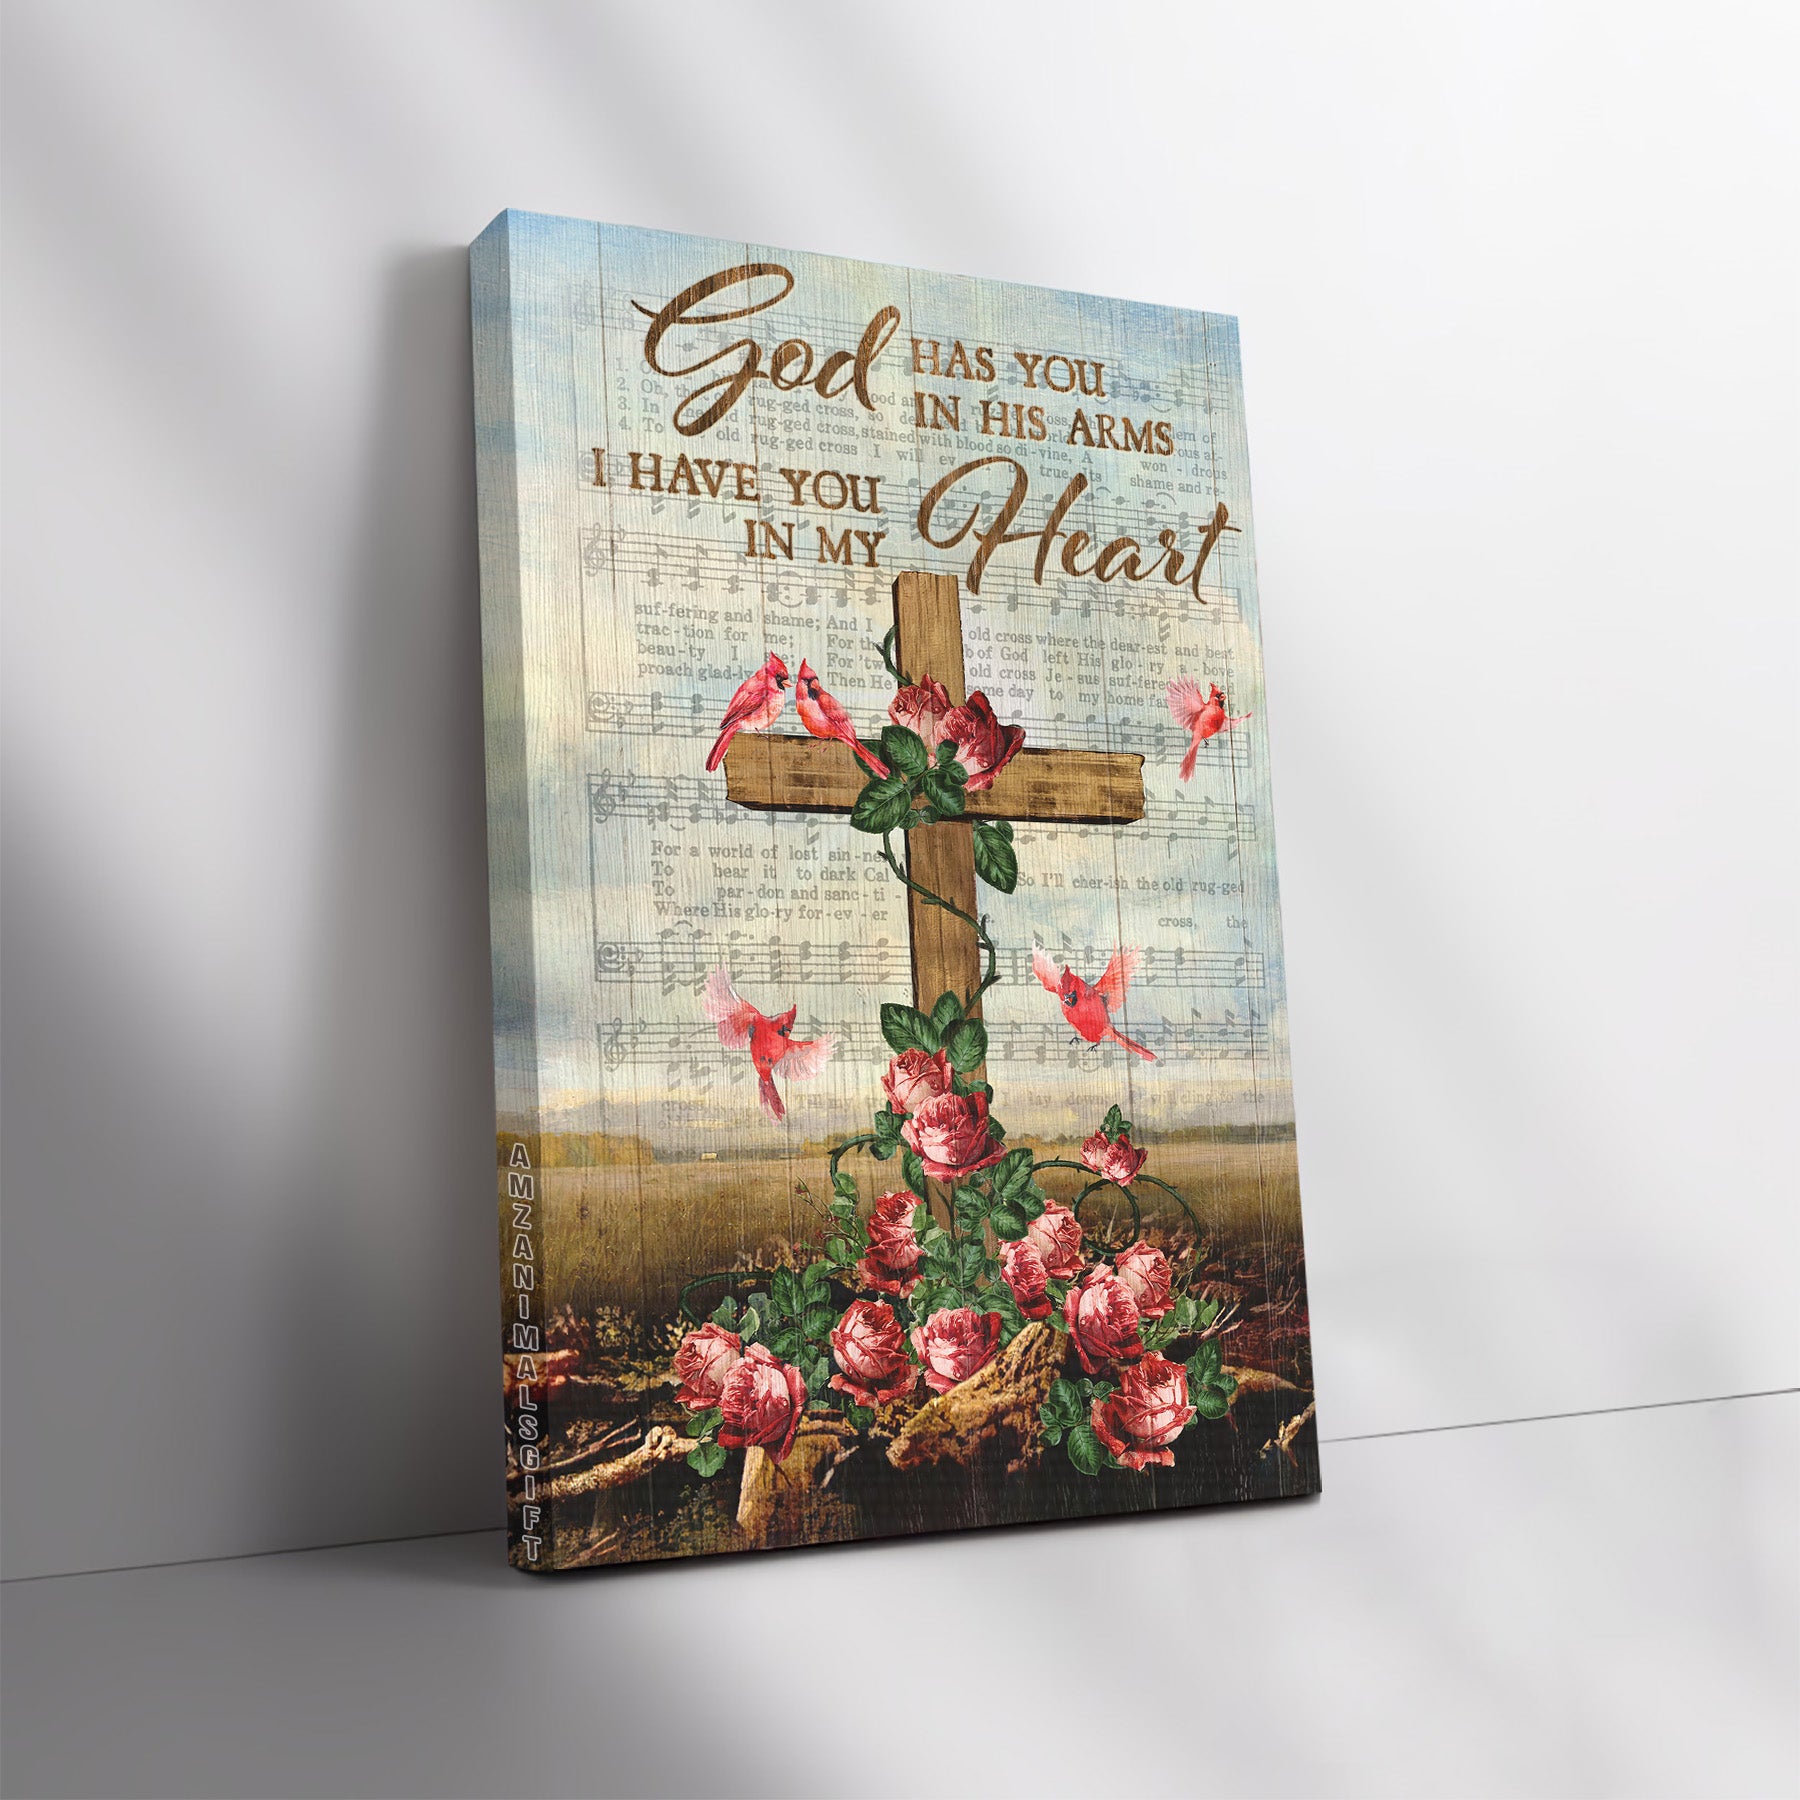 Jesus Portrait Premium Wrapped Canvas - Brilliant red rose, Pretty cardinal, Wooden cross canvas, God has you in his arms - Gift for Christian